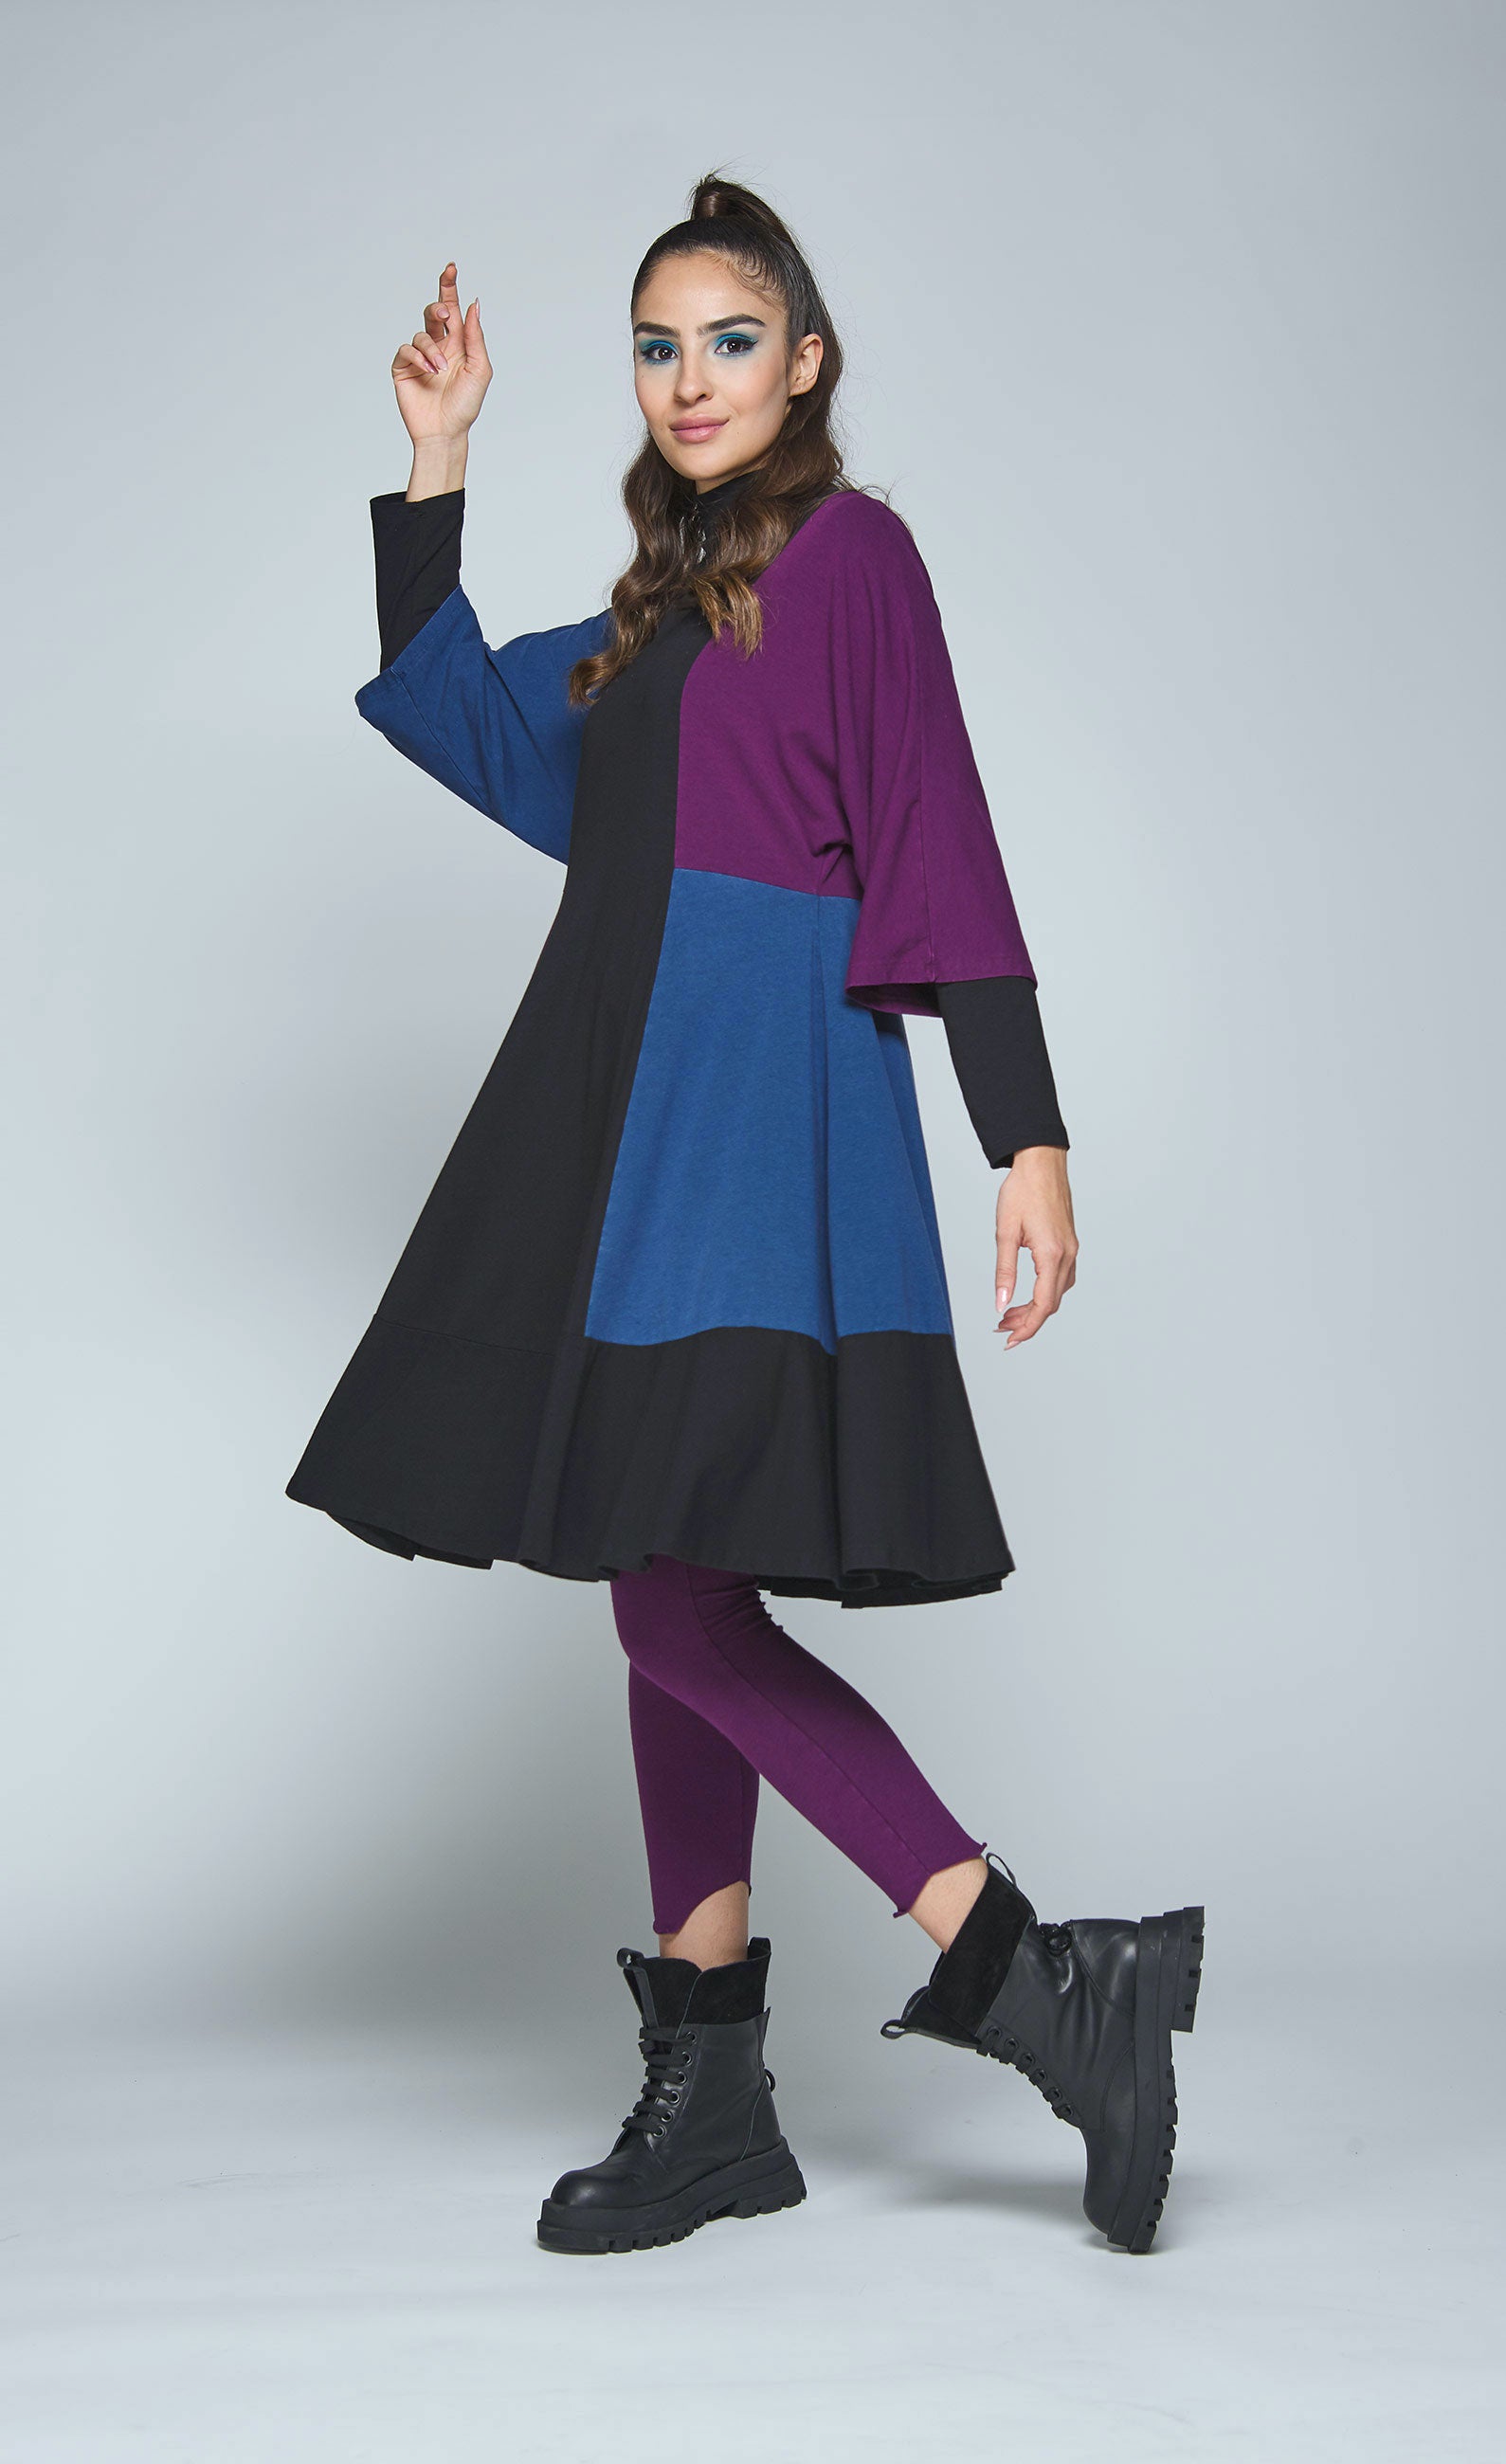 Left side full body view of a woman wearing the luukaa color block tunic/dress. This knee-length dress is black with a blue and purple color blocking on the sides and sleeves. The dress also has elbow-length sleeves and a funnel neck.